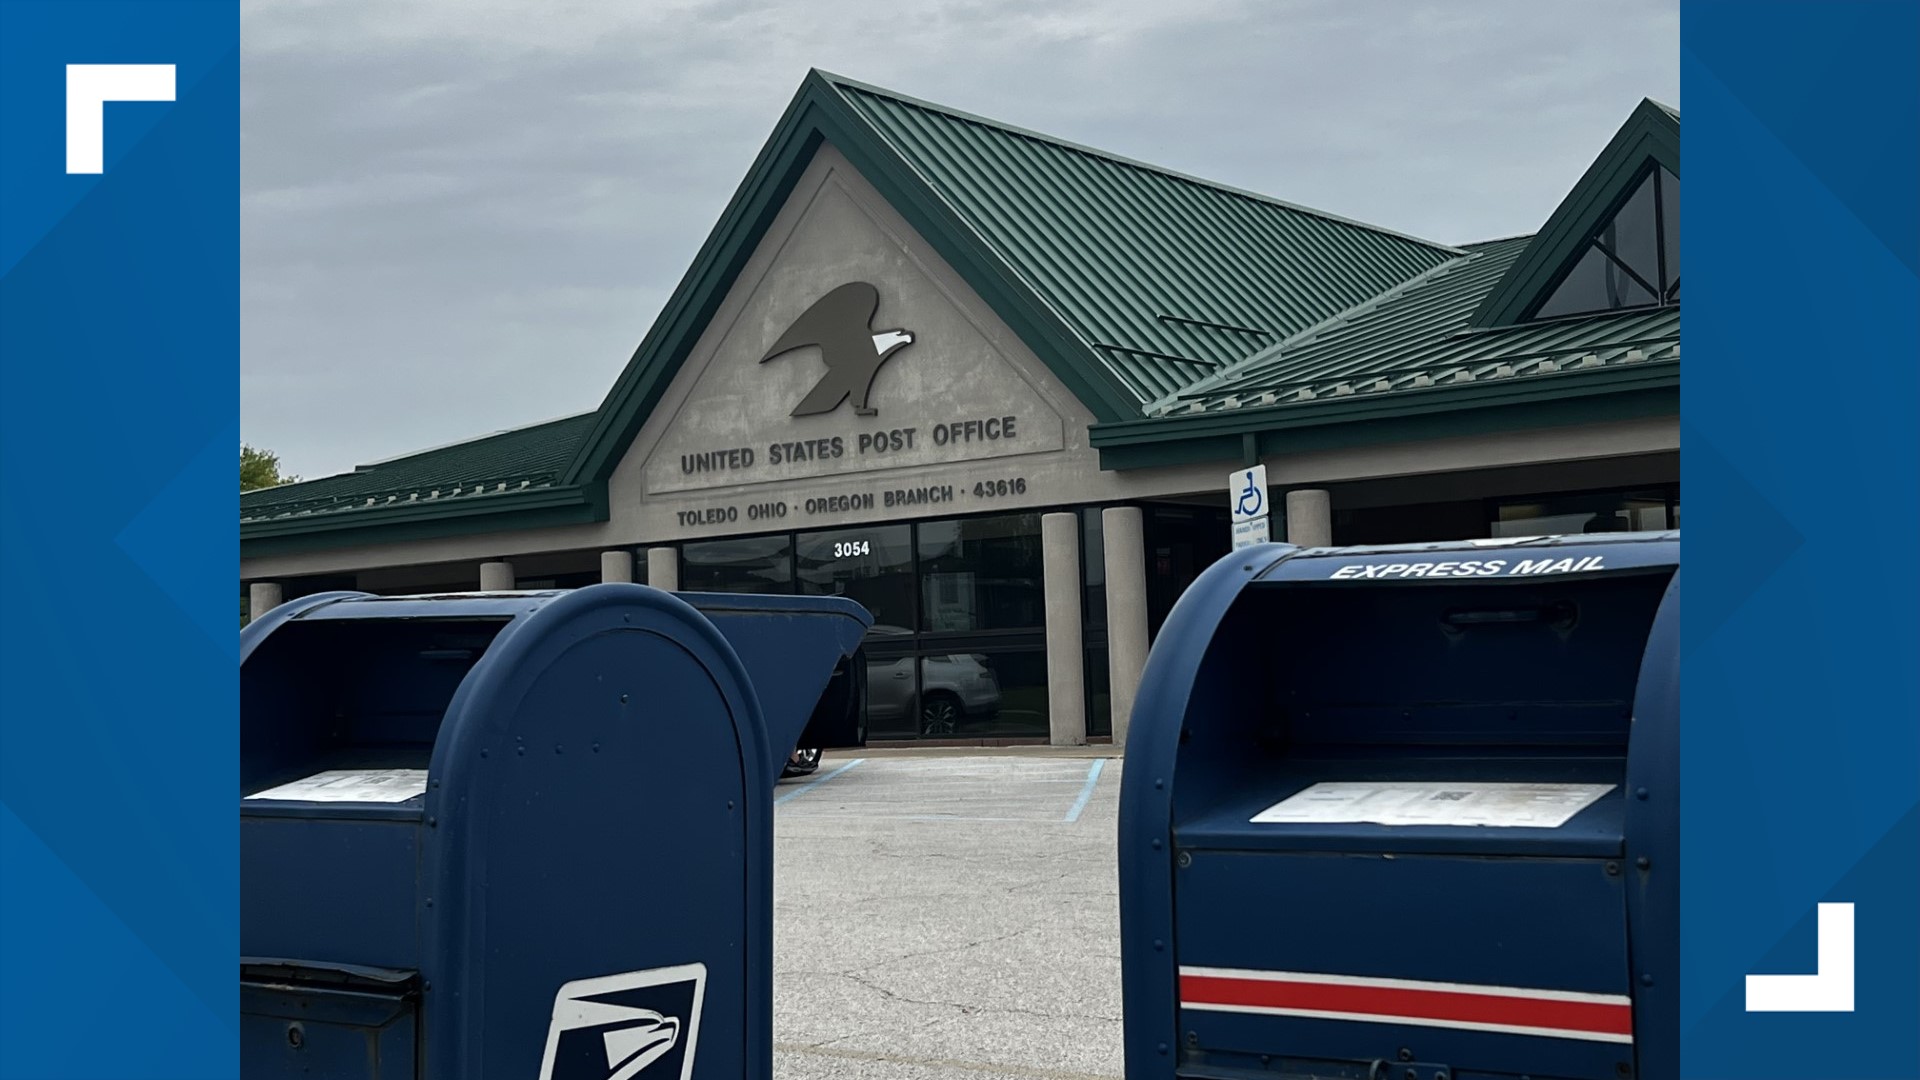 How to open a mailbox without keys and without damage 